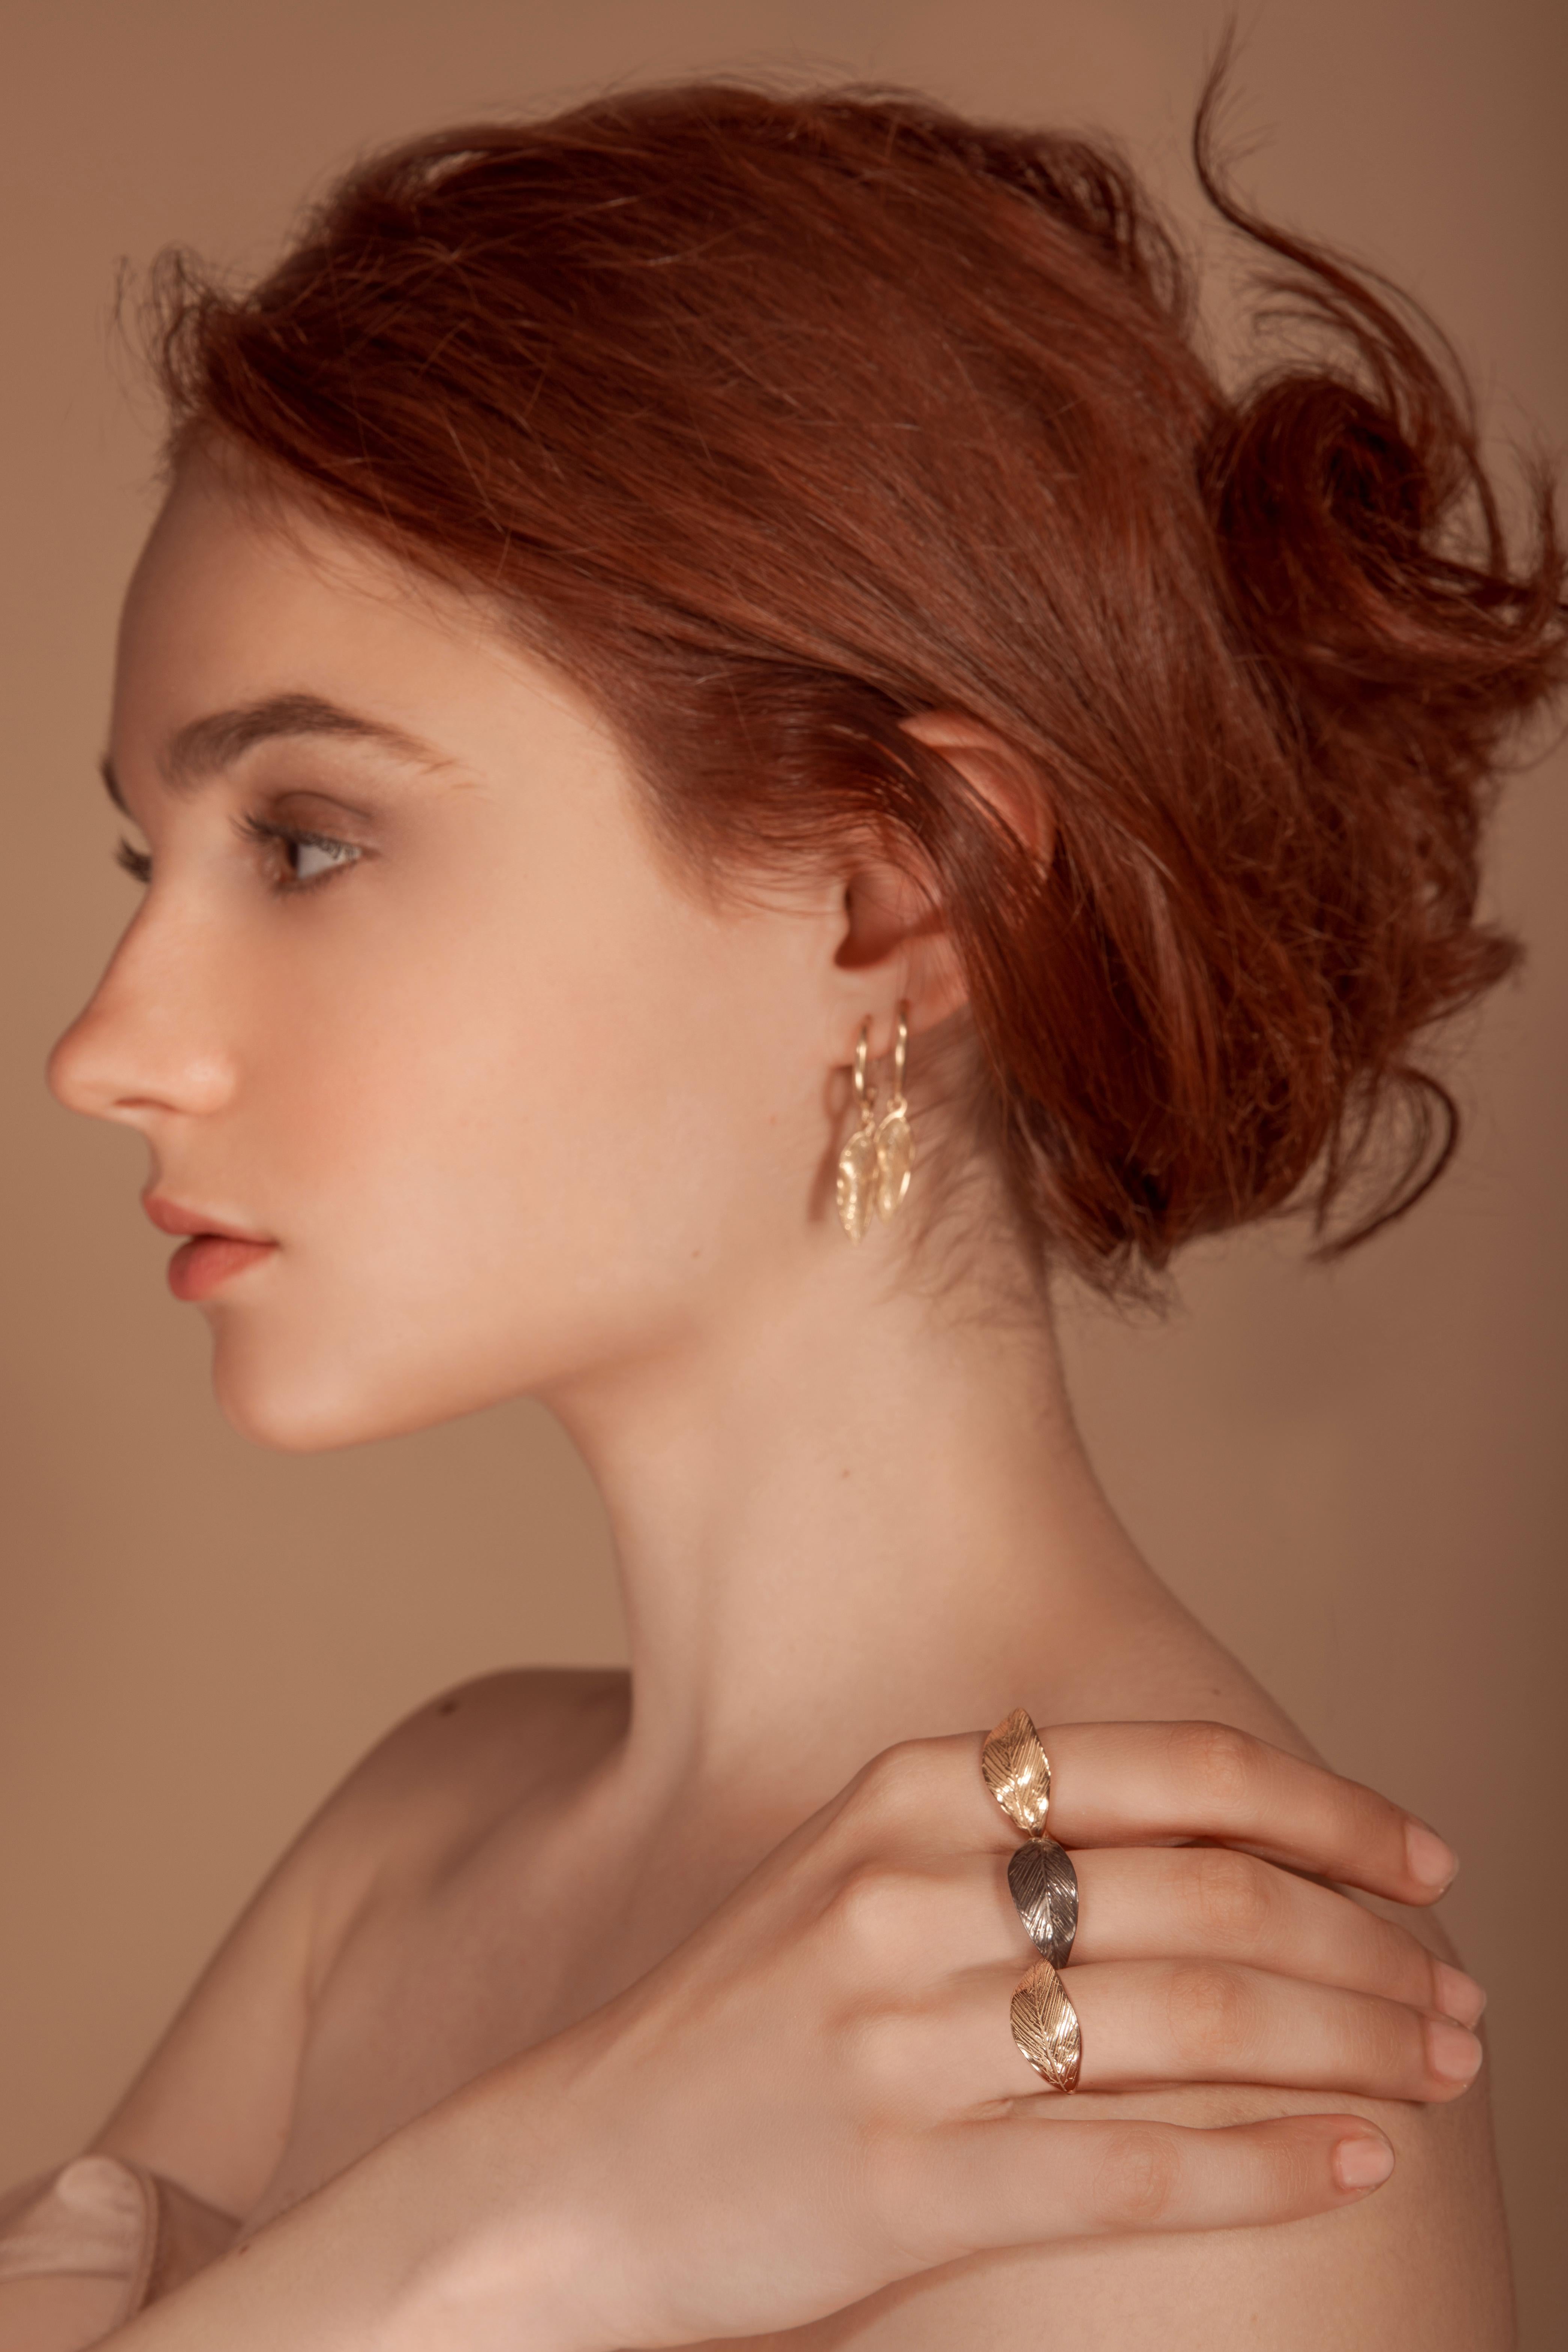 Giulia Barela Jewelry are wearable sculptures. They are limited editions and entirely handmade in Italy by selected goldsmiths in 24kt gold  using traditional Italian artisanal techniques.